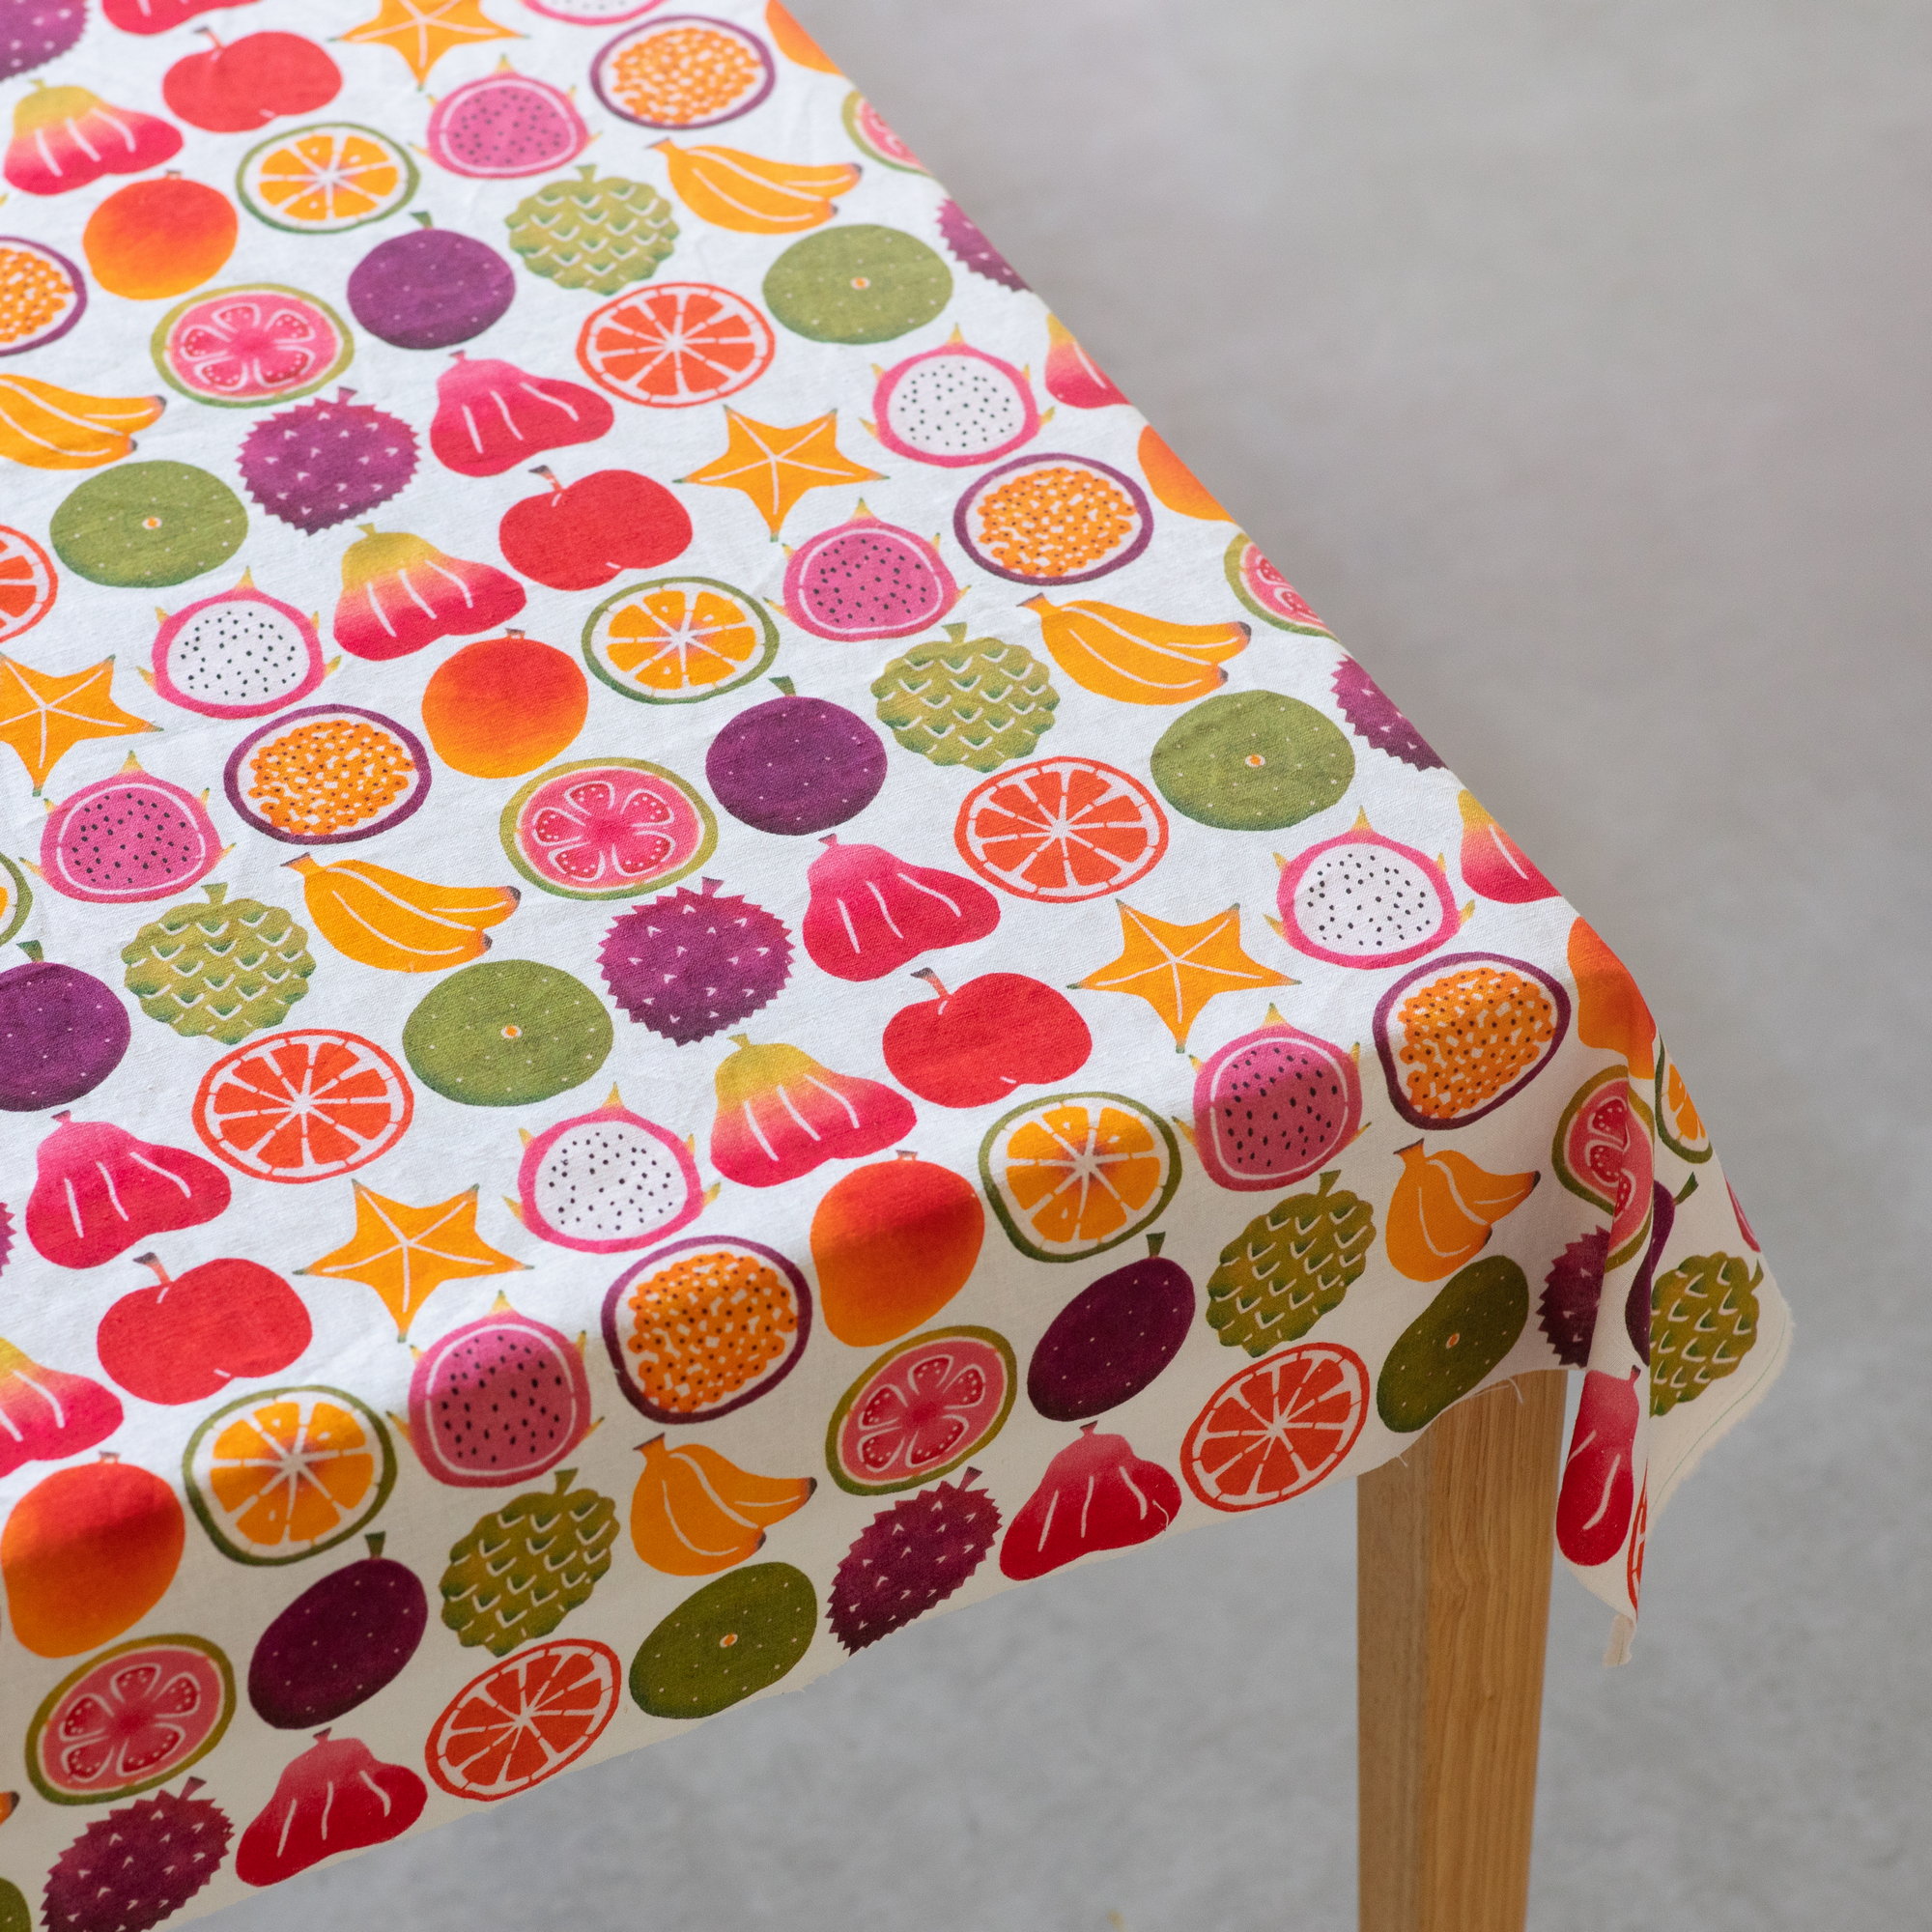 Read more about the article テキスタイル「トロピカル＊フルーツ」　Textile “Tropical*Fruits”